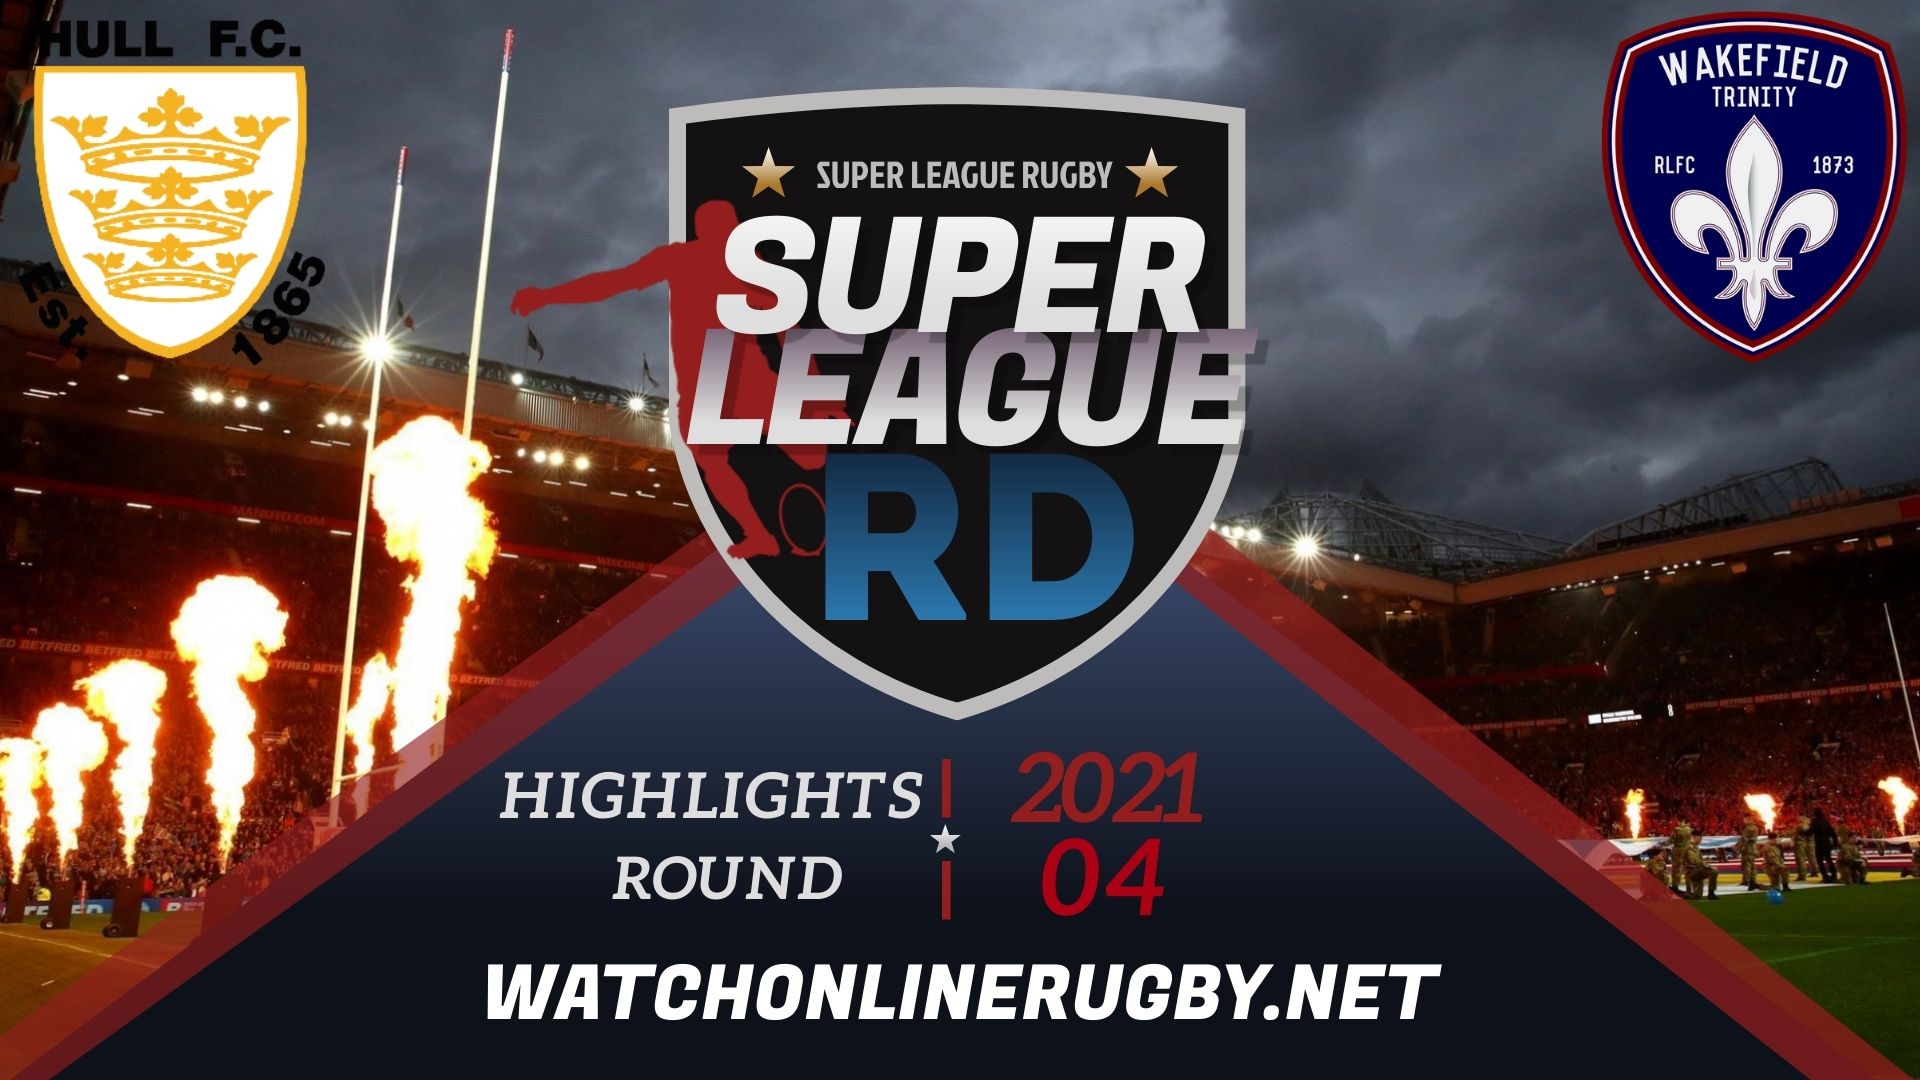 Hull FC Vs Wakefield Trinity Super League Rugby 2021 RD 4